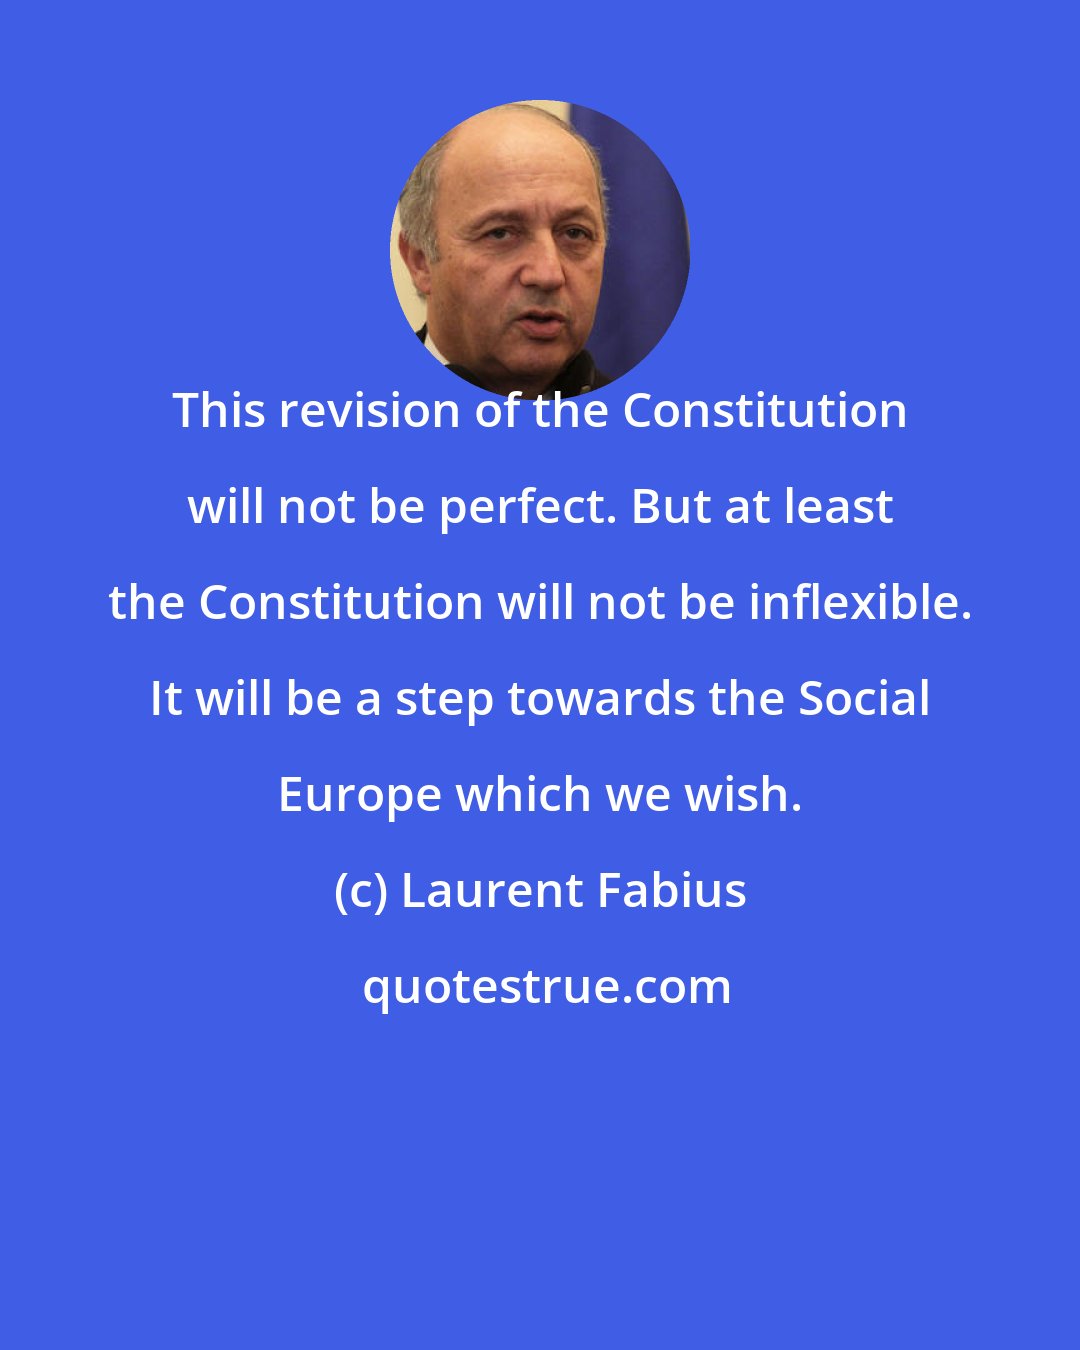 Laurent Fabius: This revision of the Constitution will not be perfect. But at least the Constitution will not be inflexible. It will be a step towards the Social Europe which we wish.